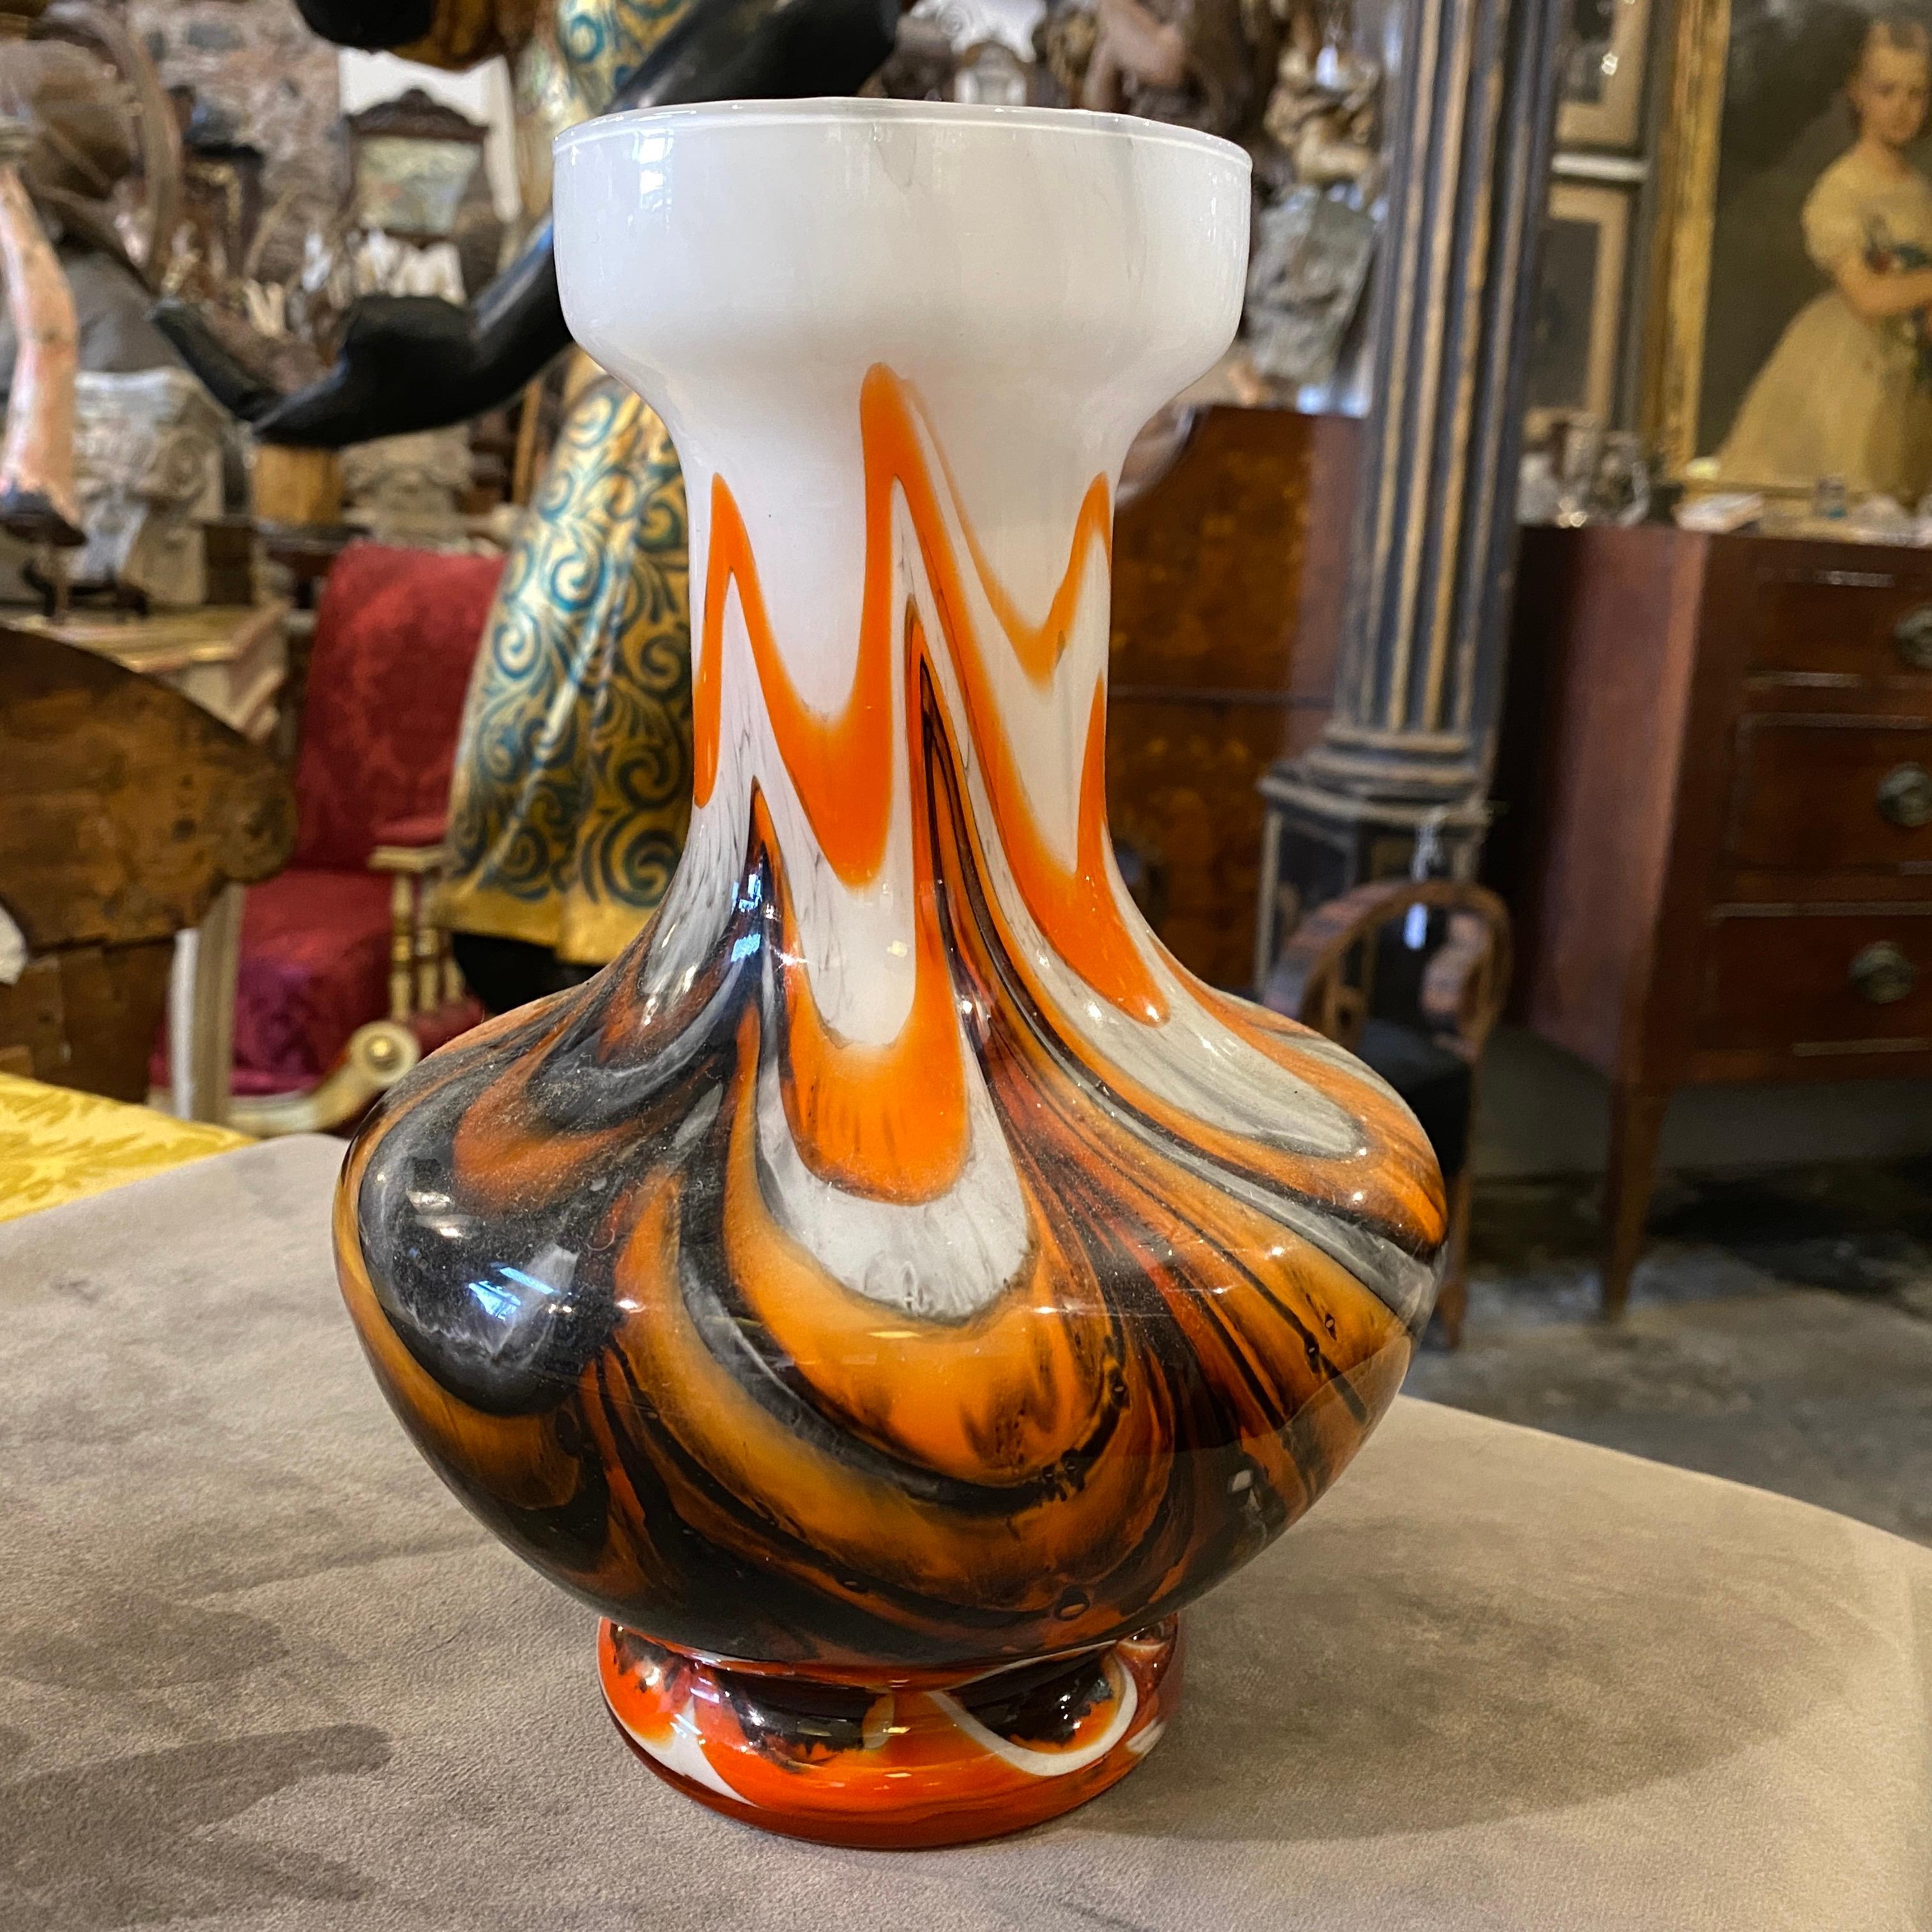 An opaline glass vase made in Italy in the Seventies. Orange and gray colors are typical of the period. It's in perfect conditions.
This captivating glass vase, designed by Carlo Moretti in the 1970s, epitomizes the essence of Mid-Century Modern